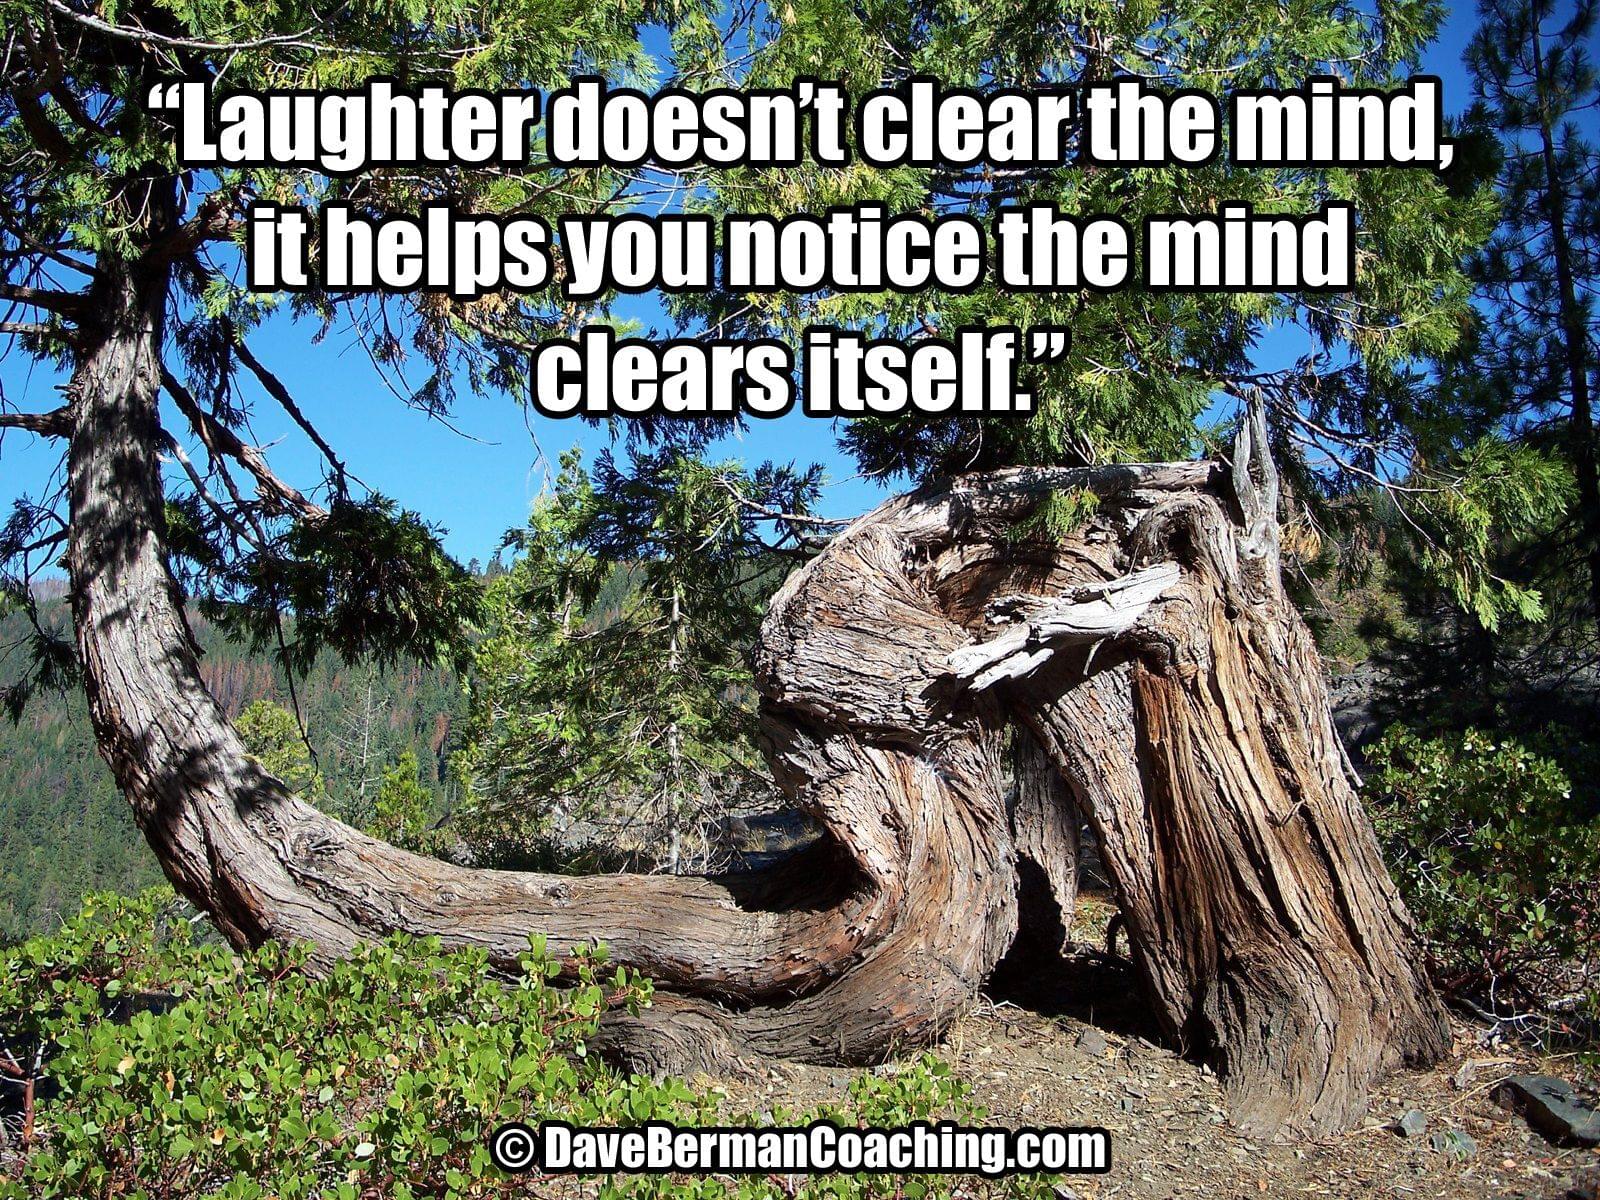 A tree stump bends along the ground several feet before finally growing upright. Caption: "Laughter doesn't clear the mind, it helps you notice the mind clears itself." © DaveBermanCoaching.com